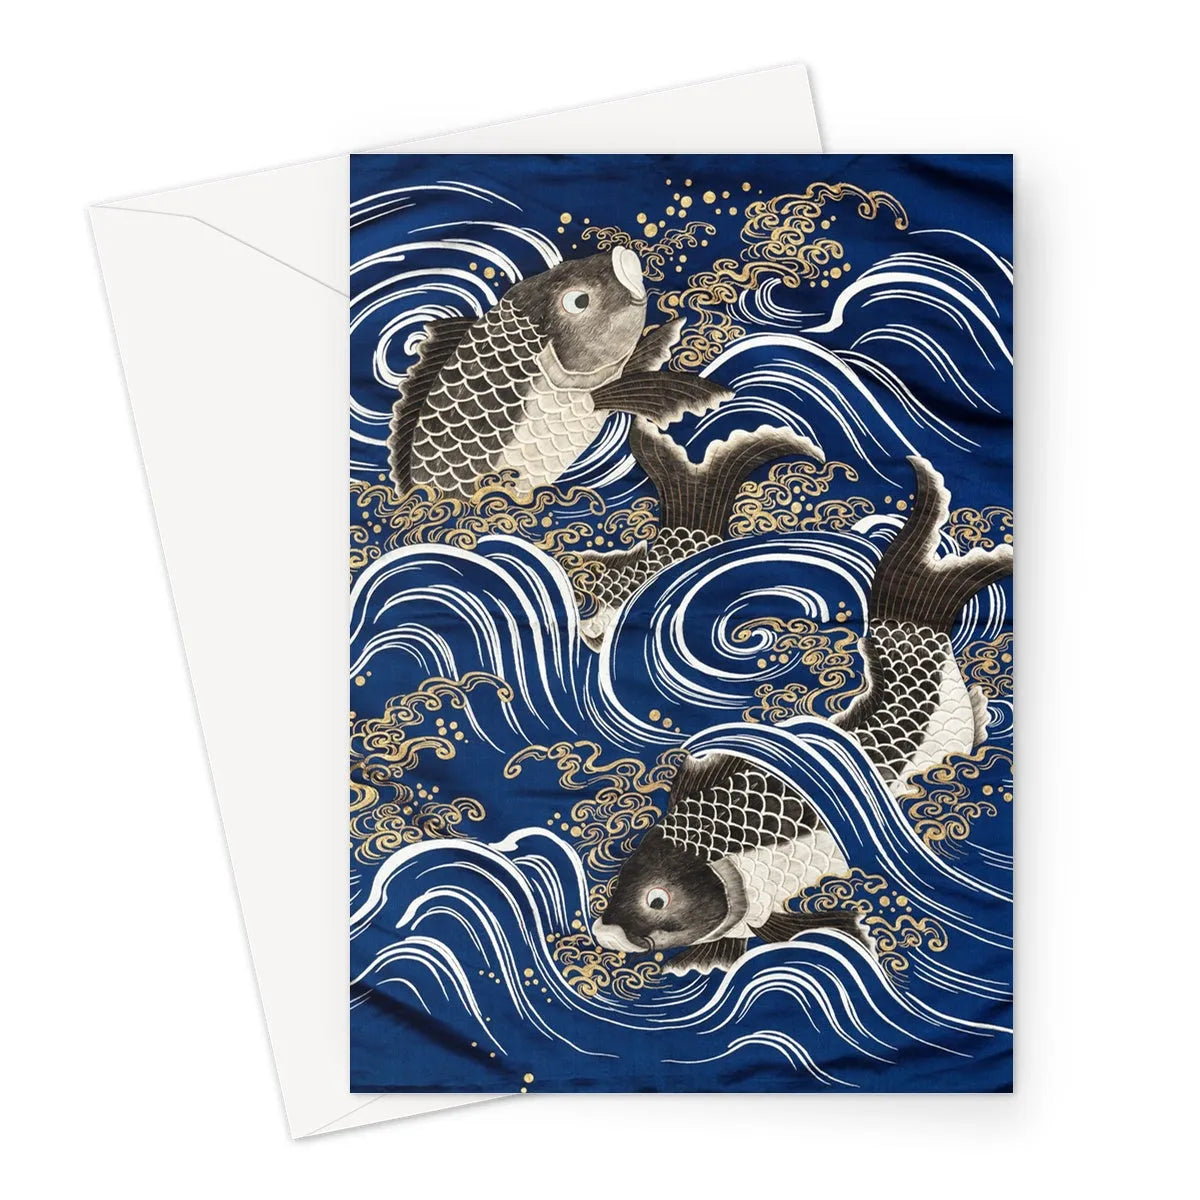 Fukusa And Carp In Waves - Meiji Period Art Greeting Card - A5 Portrait / 1 Card - Greeting & Note Cards - Aesthetic Art